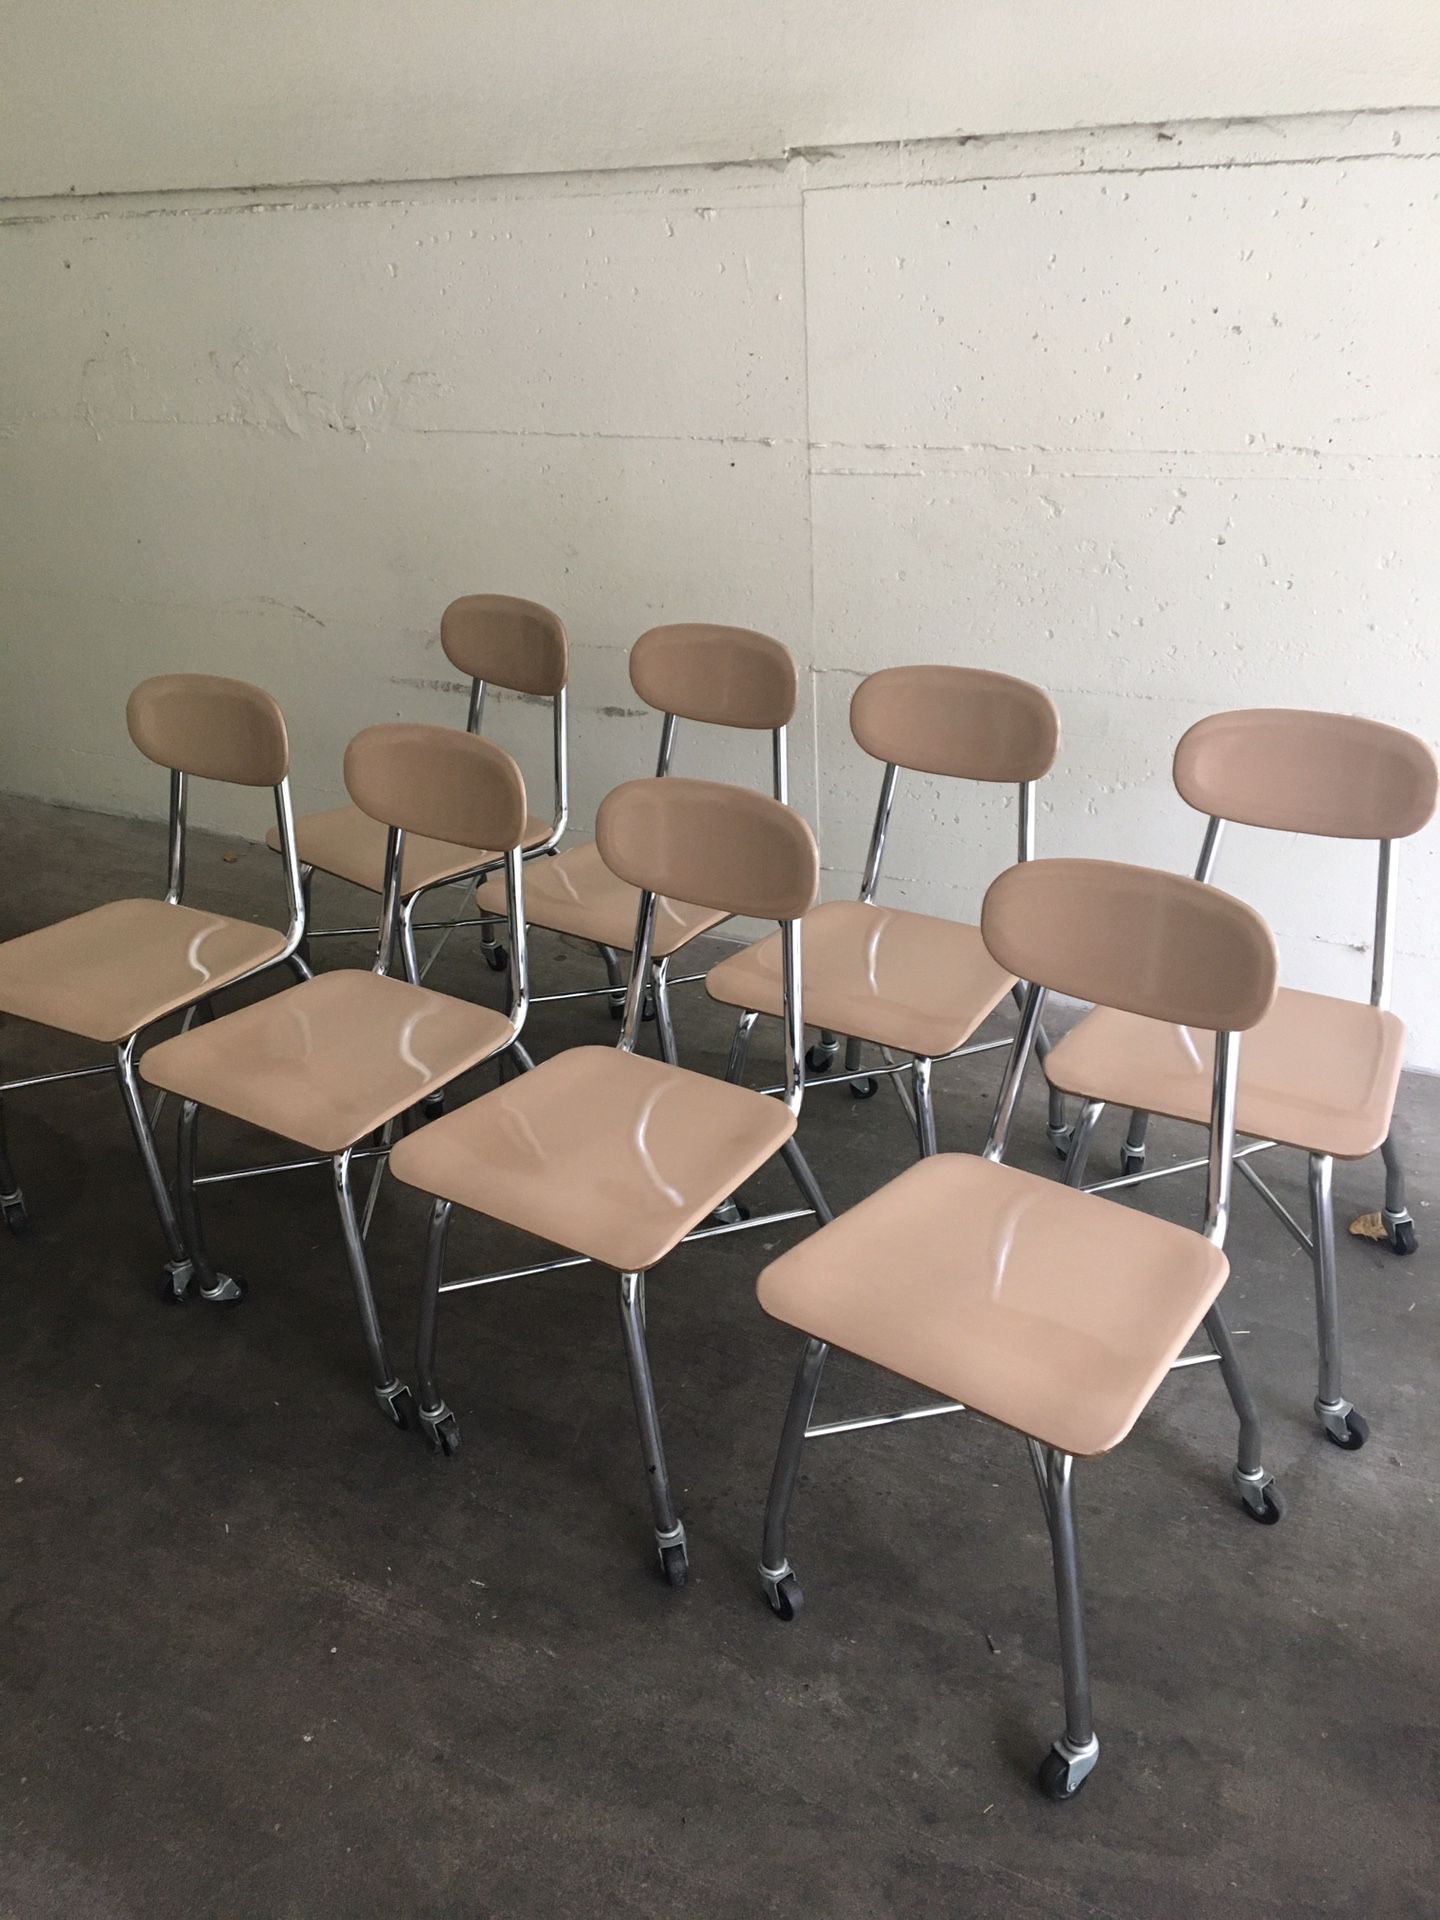 8 heavy Duty Columbia Commercial School Chairs On Casters